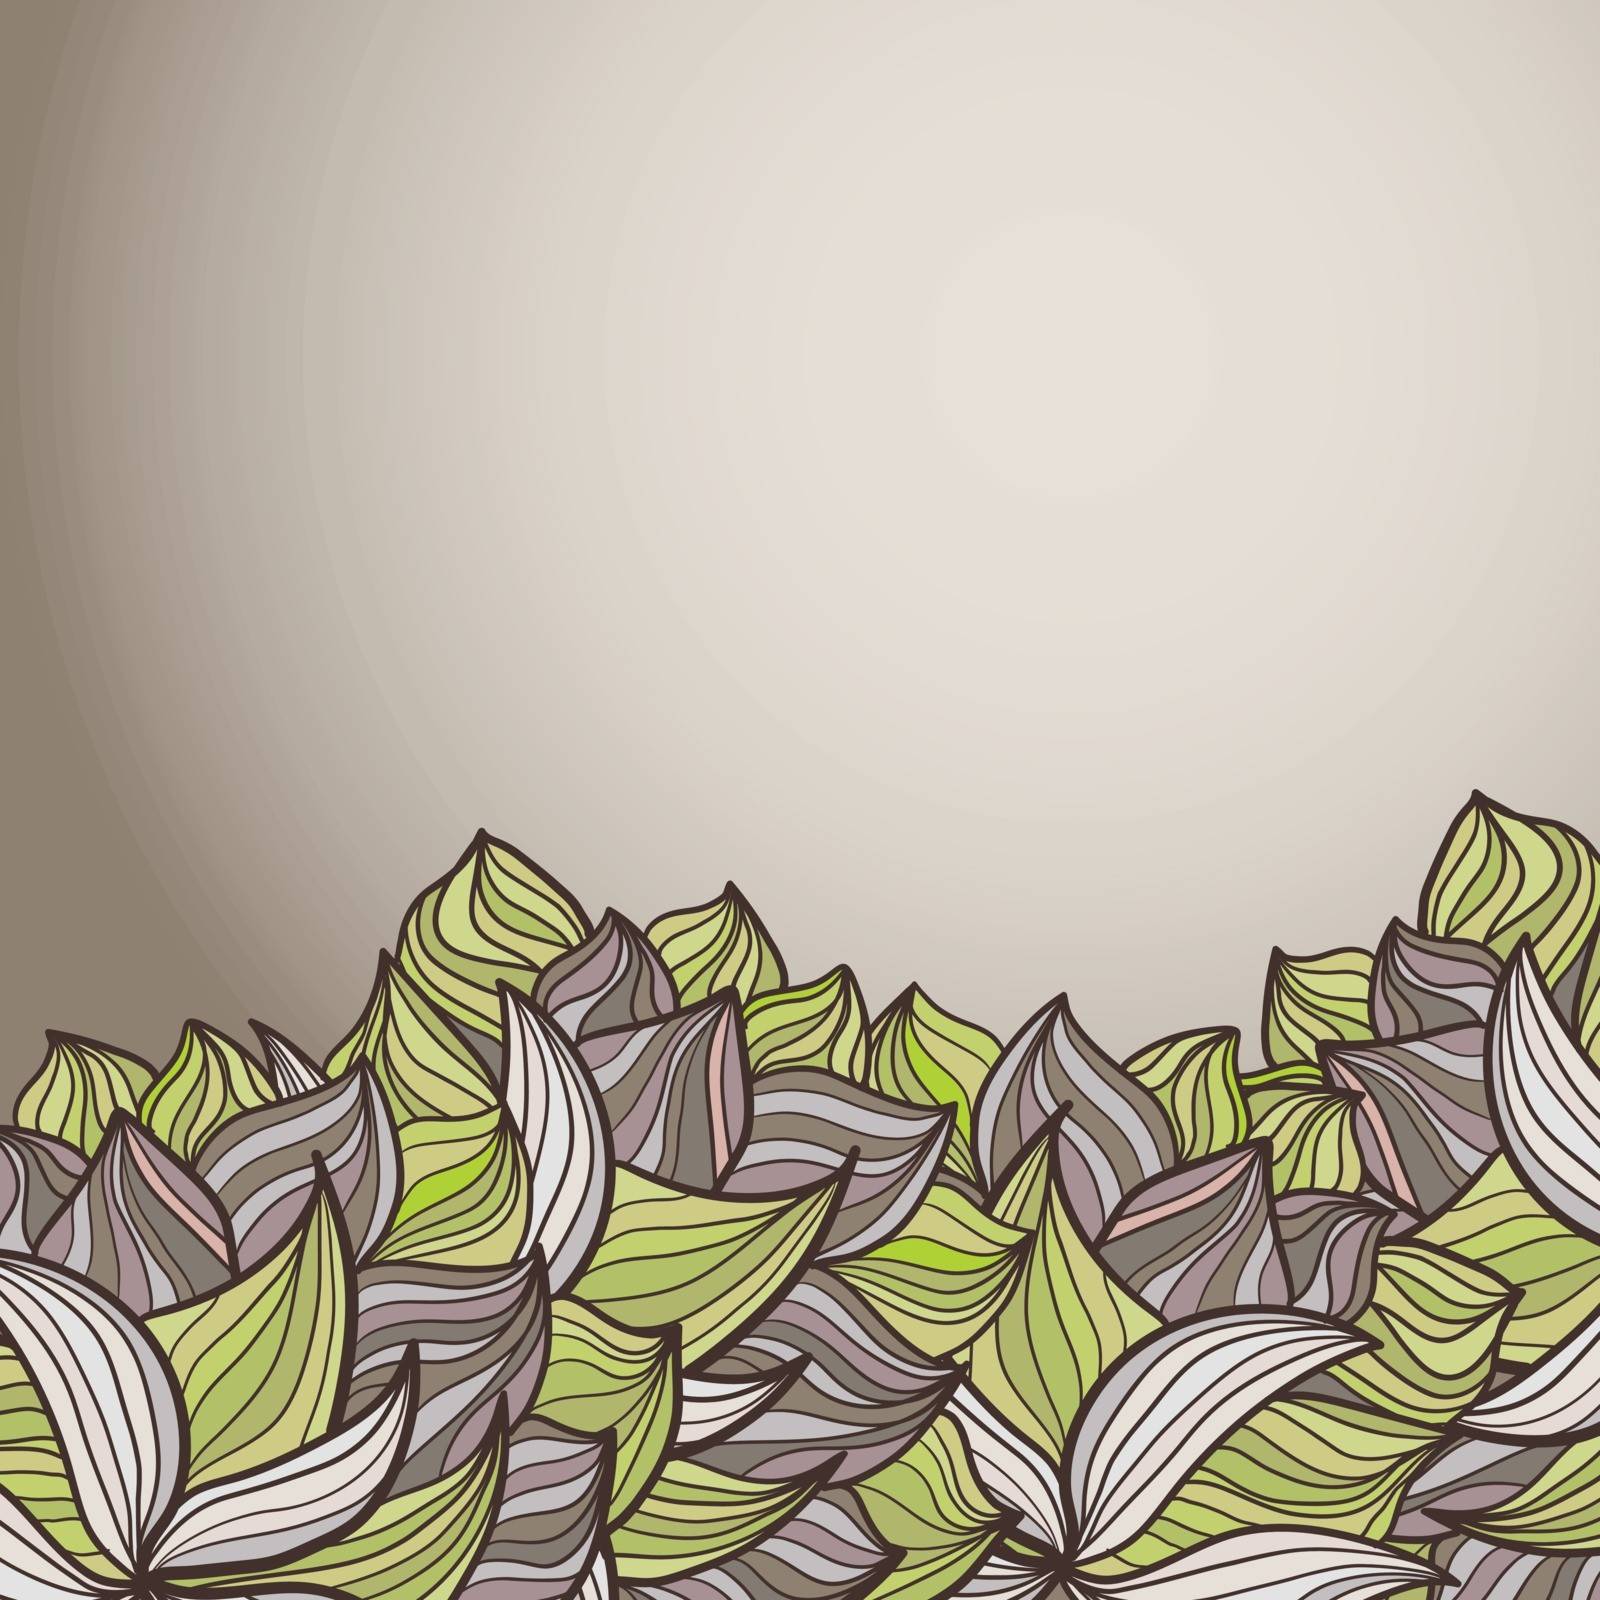 abstract background of petals and waves. Plant elements. Use as a backdrop, greeting card. You can put text on top